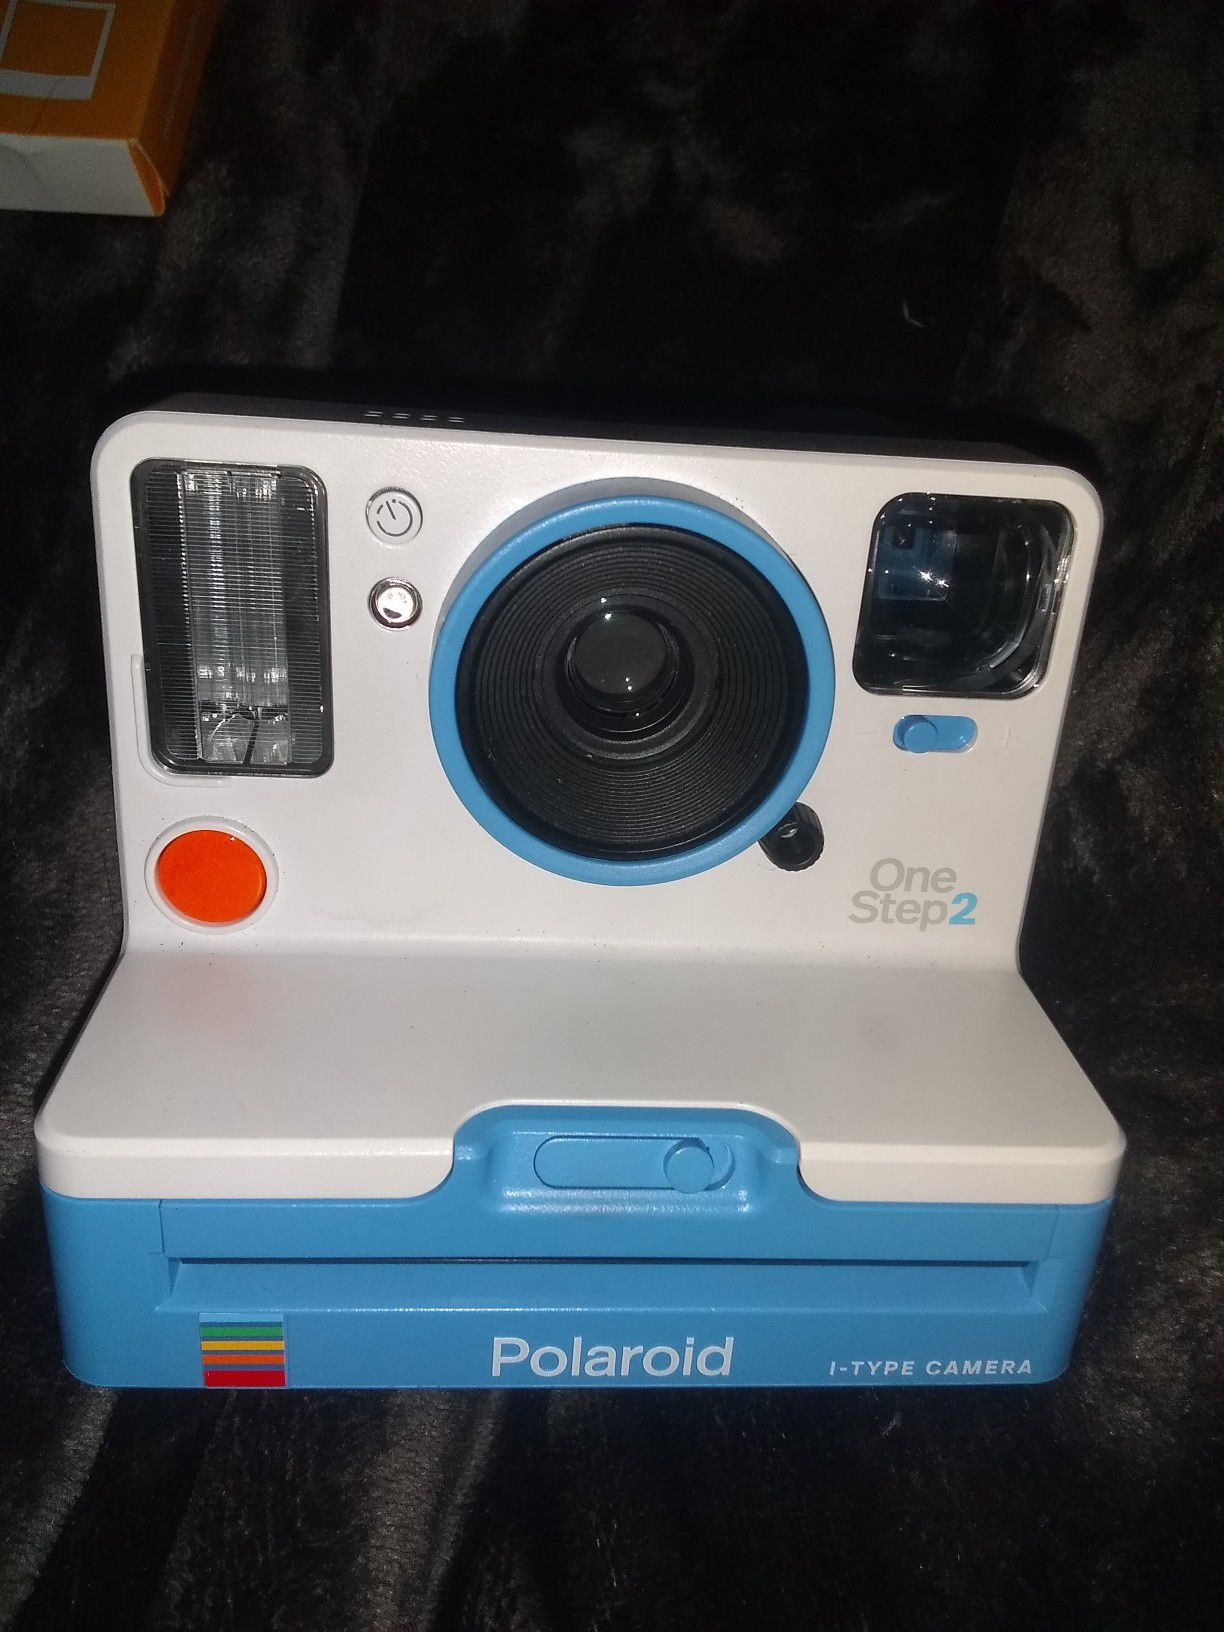 Full-size Polaroid camera with extra pack of film